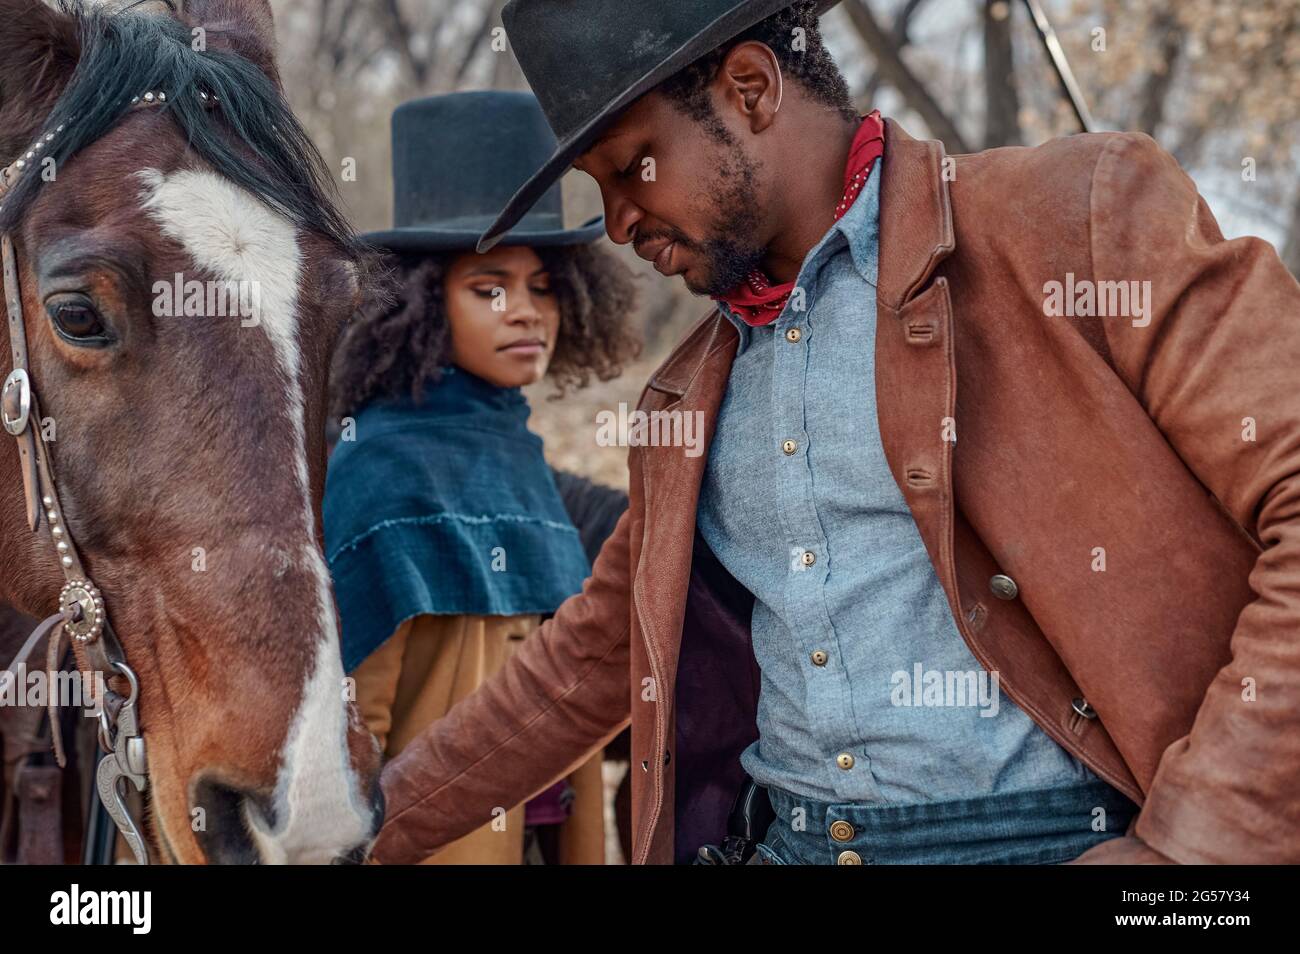 RELEASE DATE: 2021 TITLE: The Harder They Fall STUDIO: Netflix DIRECTOR: Jeymes Samuel PLOT: When an outlaw discovers his enemy is being released from prison, he reunites his gang to seek revenge in this Western. STARRING: ZAZIE BEETZ, JONATHAN MAJORS as Nat Love. (Credit Image: © Netflix/Entertainment Pictures) Stock Photo